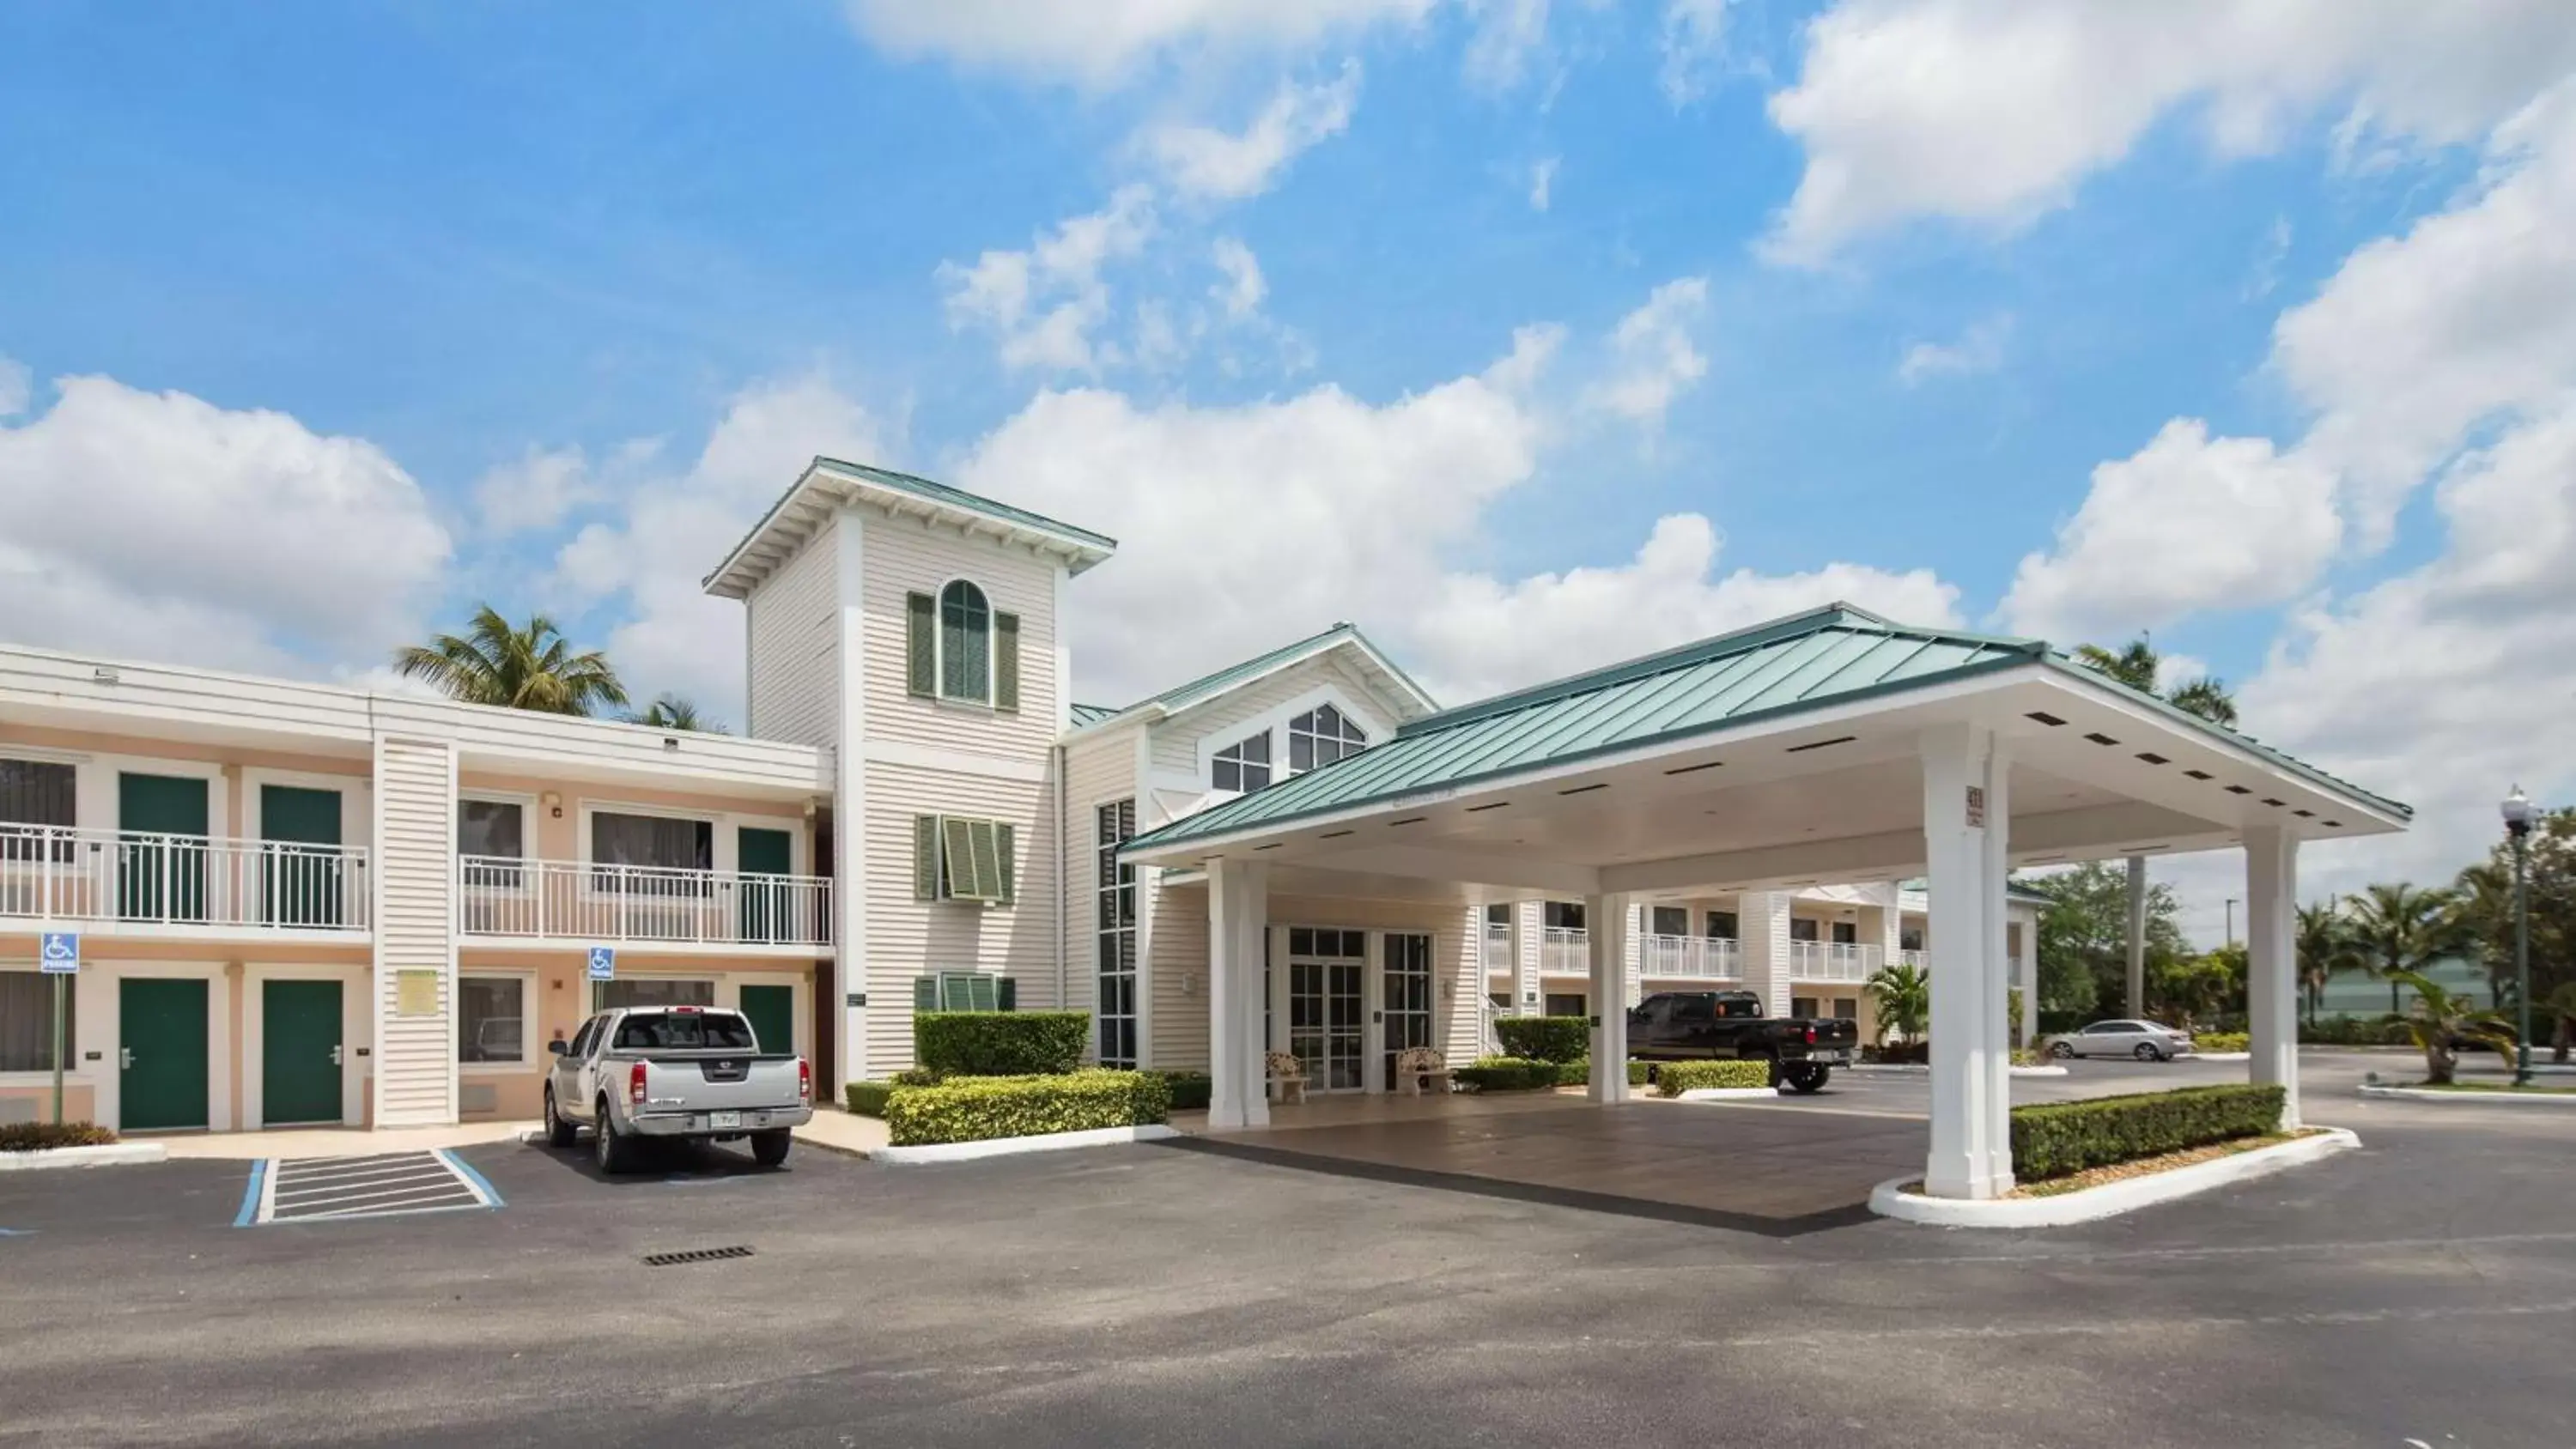 Property building in Best Western Gateway To The Keys - Florida City, Homestead, Everglades